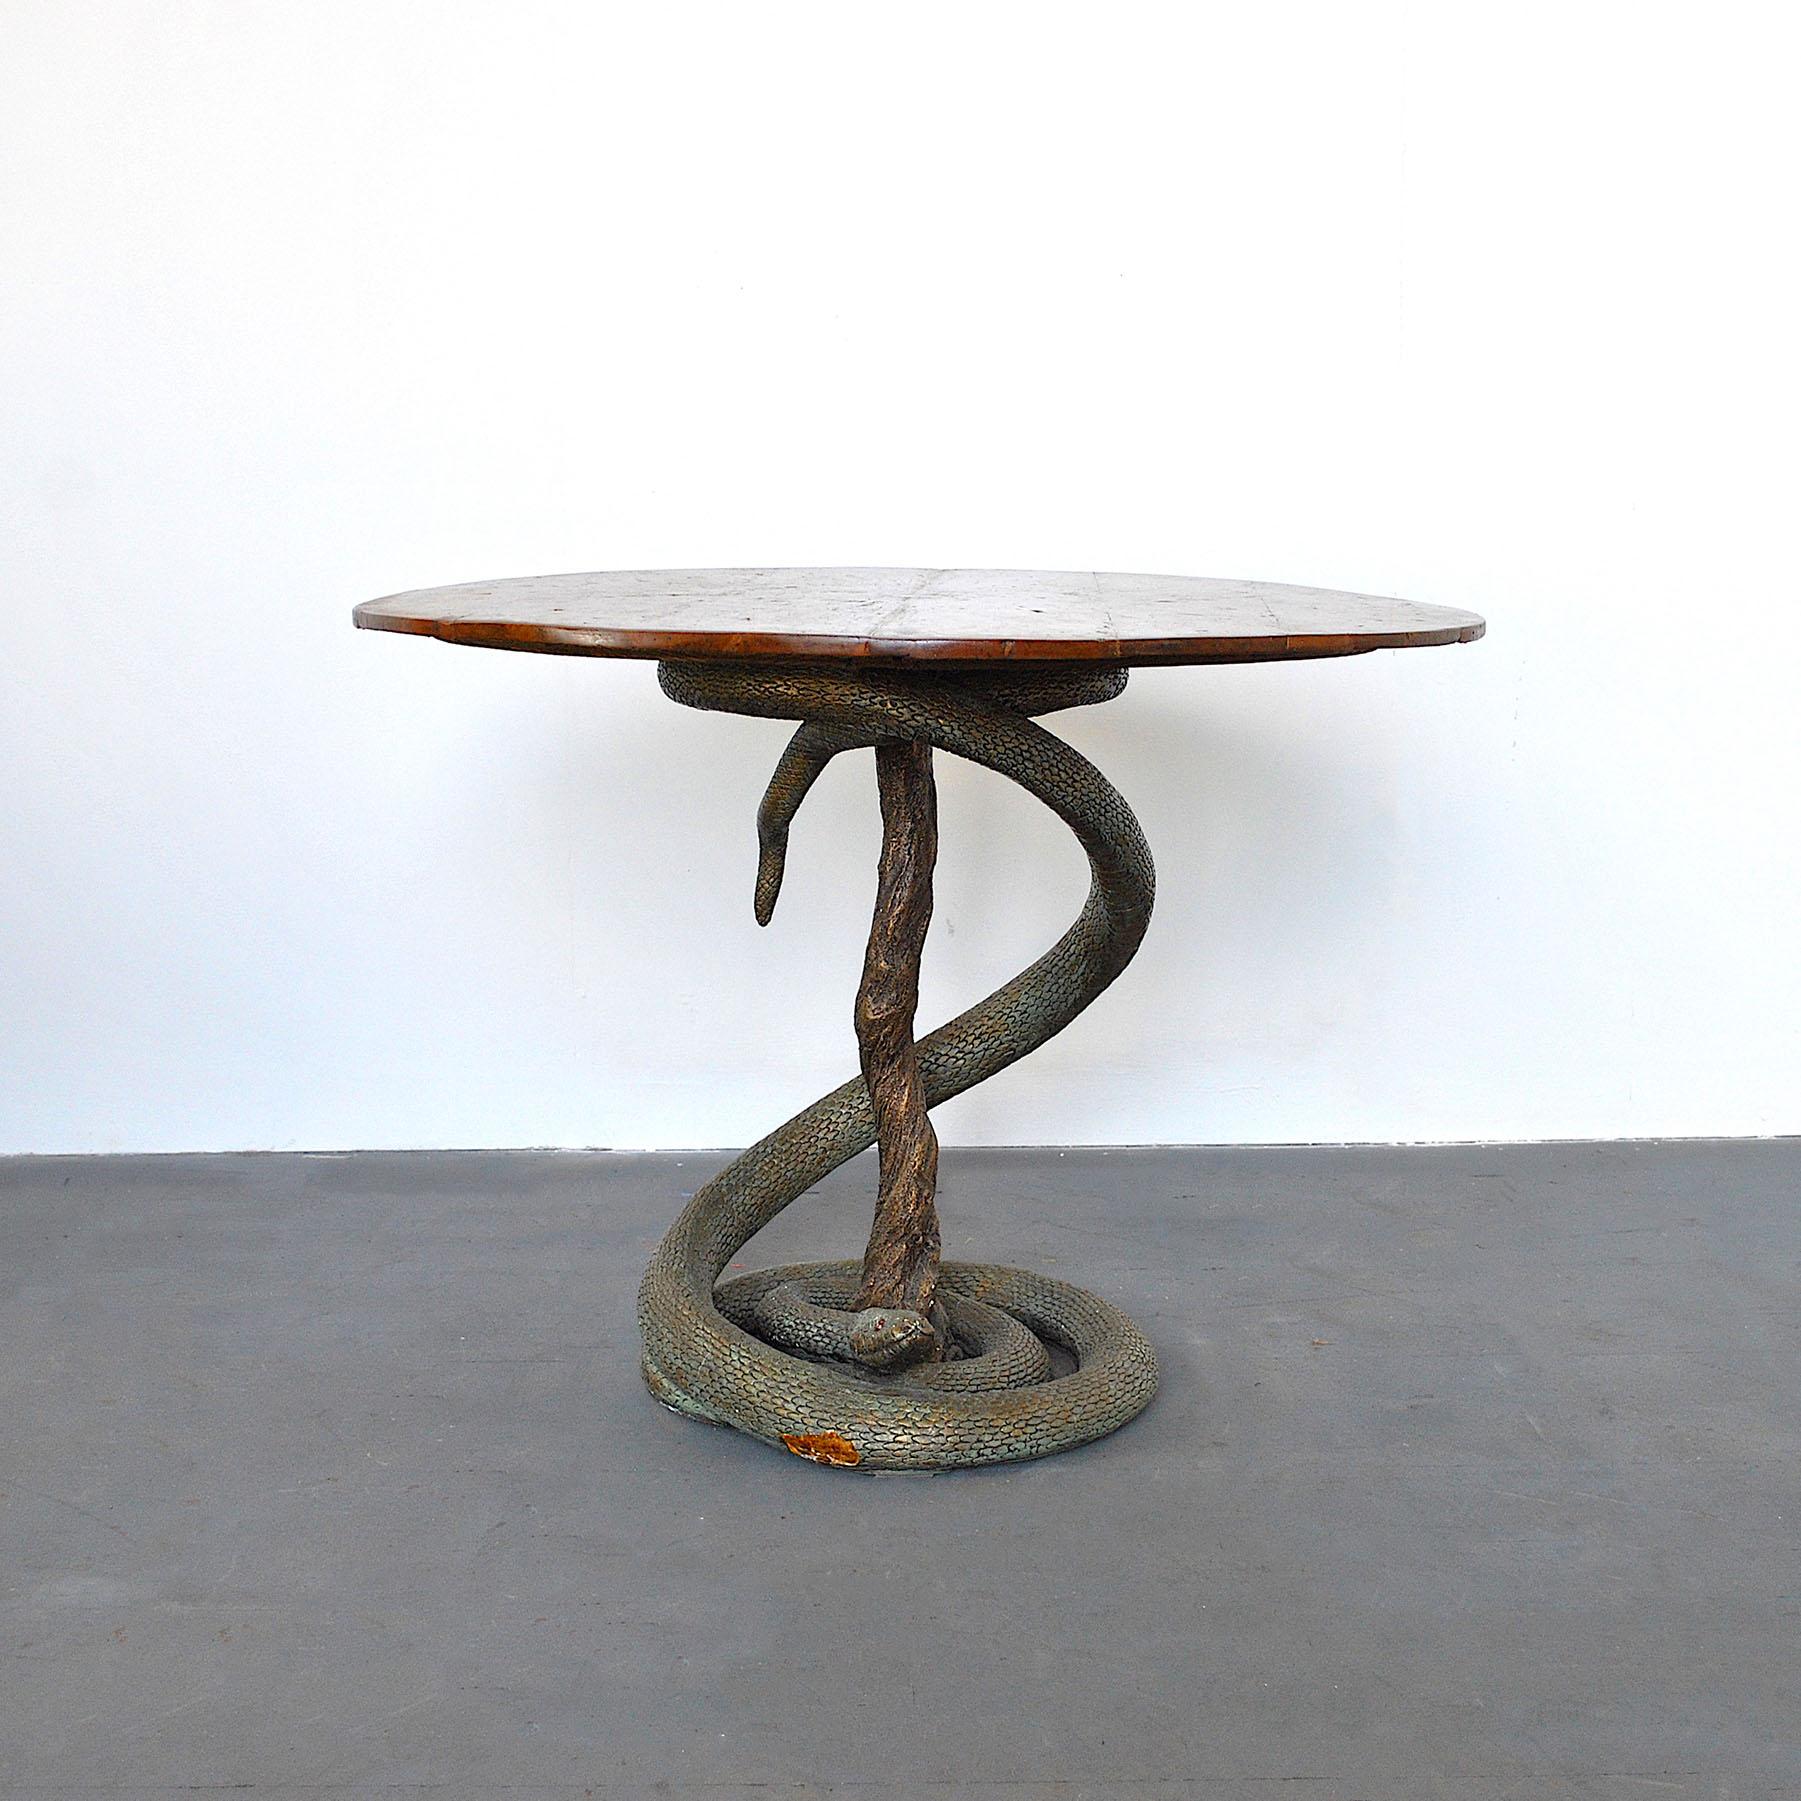 Mid-20th Century Eclectic Game Table with Python Sculpture from the Fifties For Sale